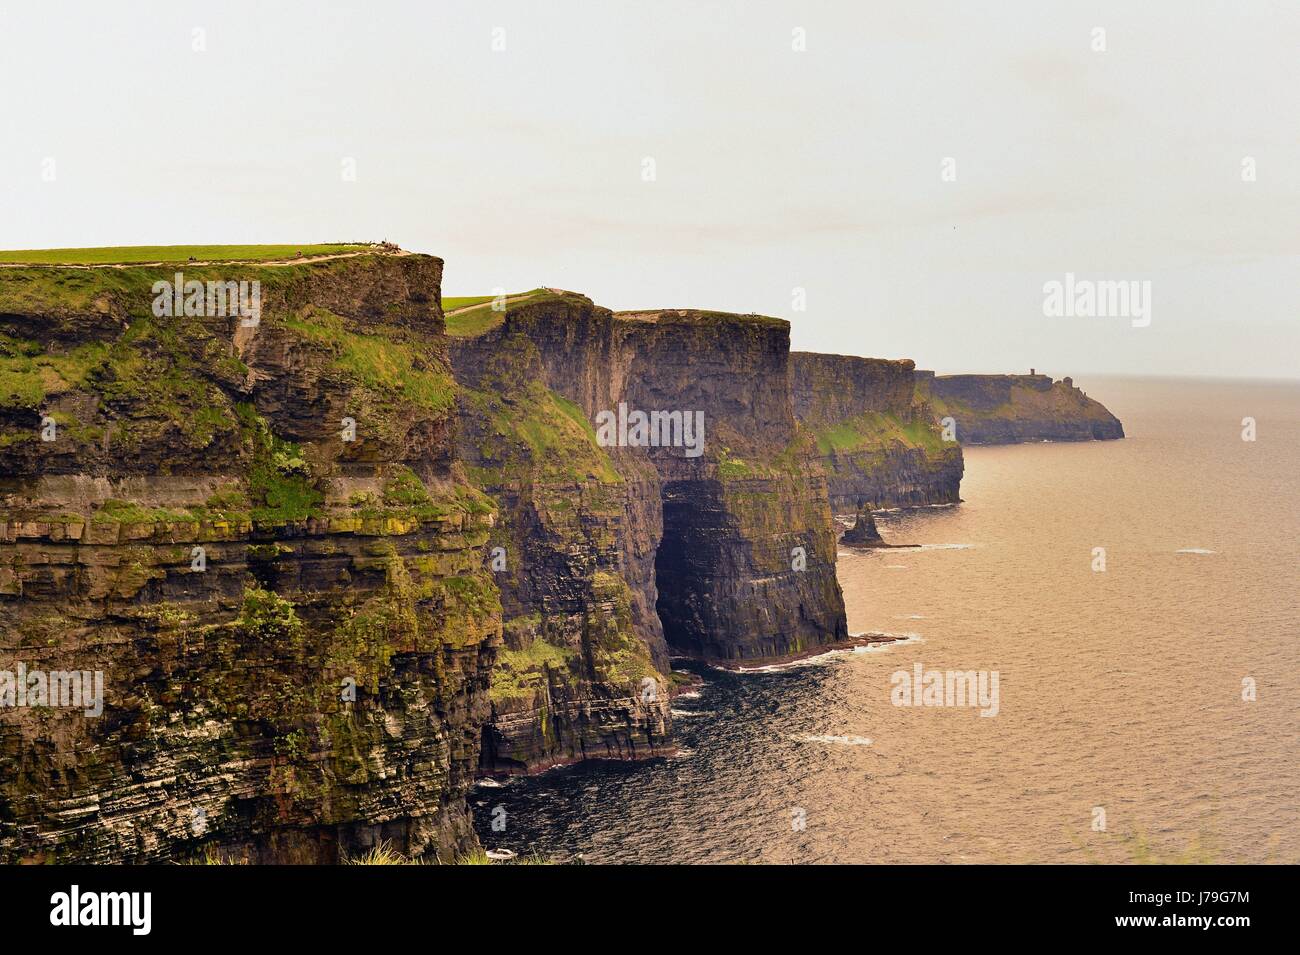 The rugged and brooding Cliffs of Moher near Liscannor, County Clare, Ireland. The cliffs are an unspoiled landmark symbol of the country. Stock Photo